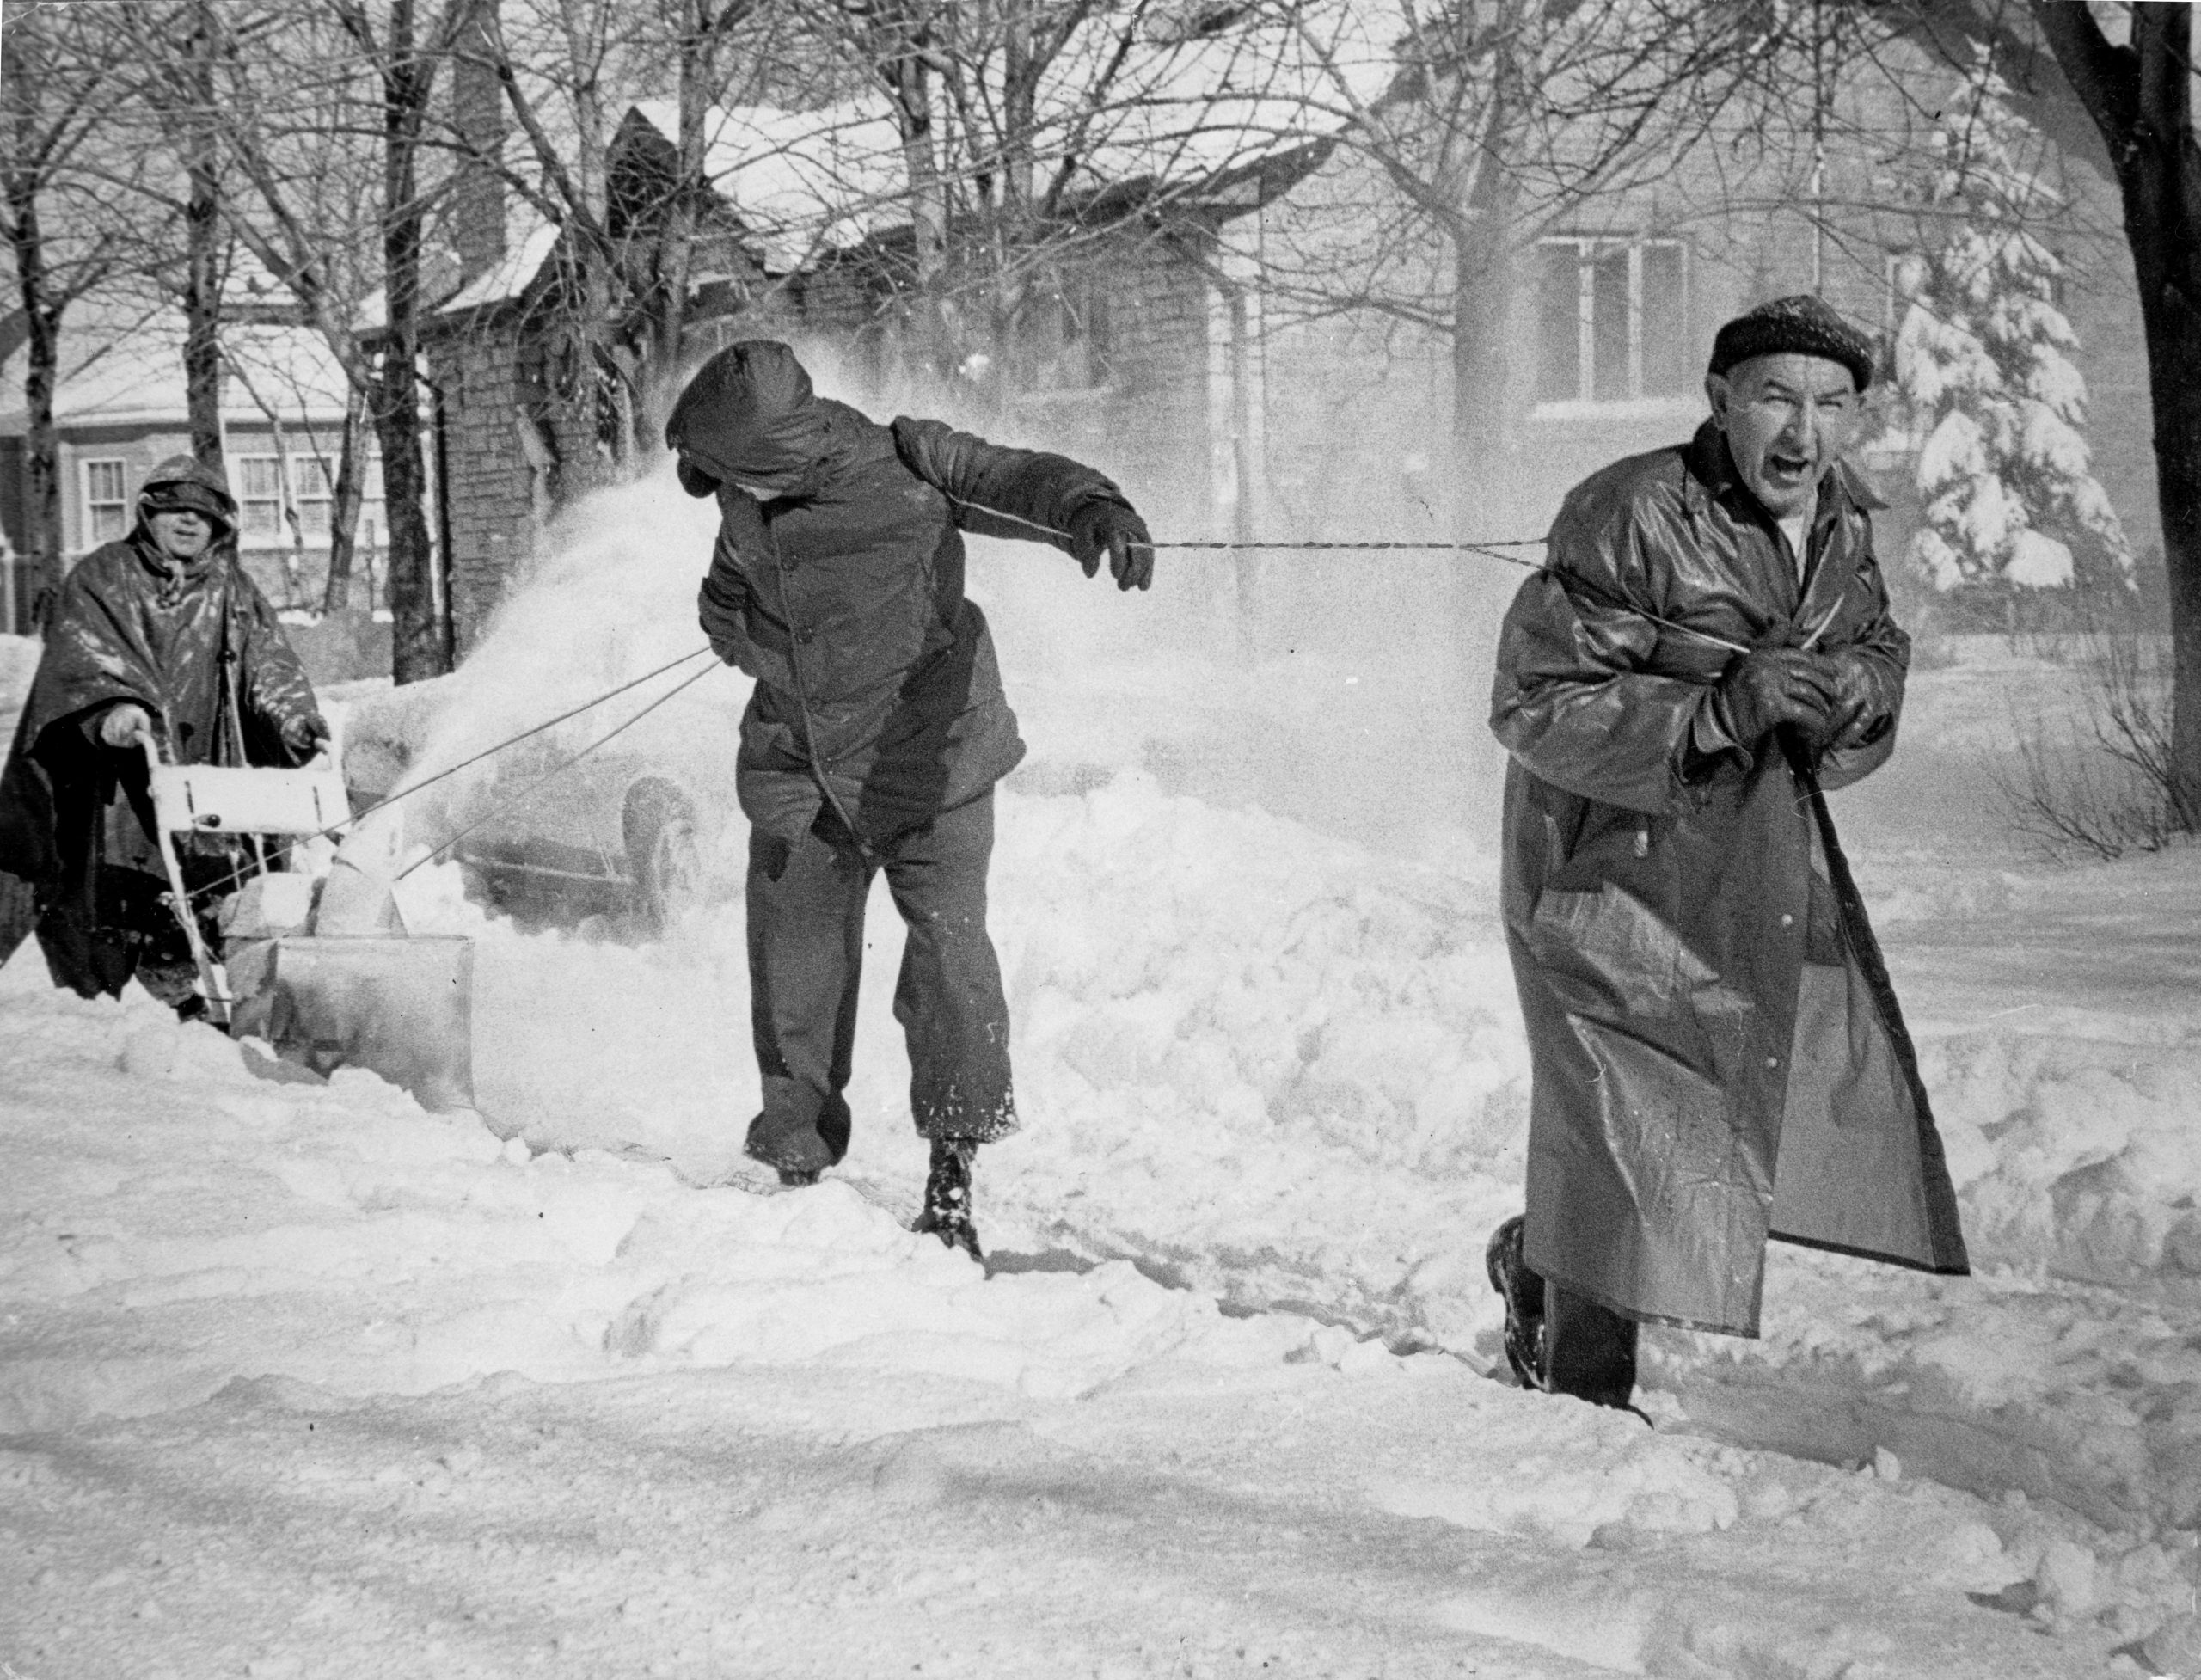 One man pushes a snowblower while two men pull with rope to clean the sidewalk after the blizzard of 1967